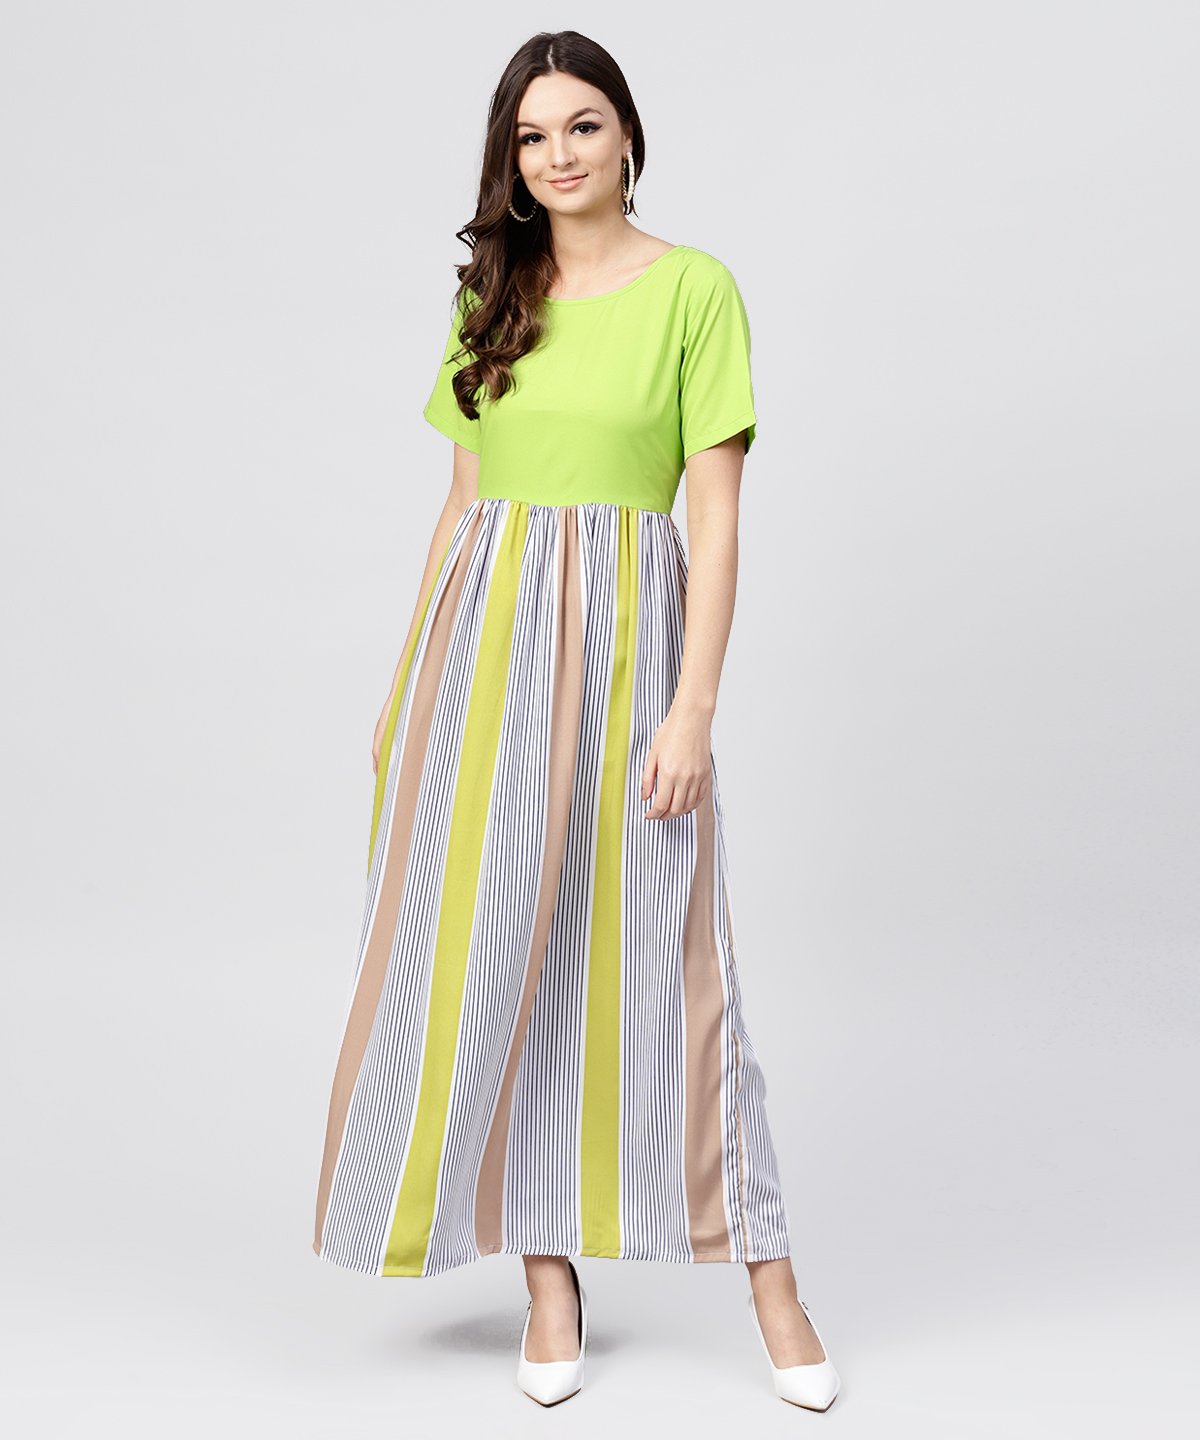 Women's Green Colored Maxi Dress With Round Neck And Half Sleeves - Nayo Clothing